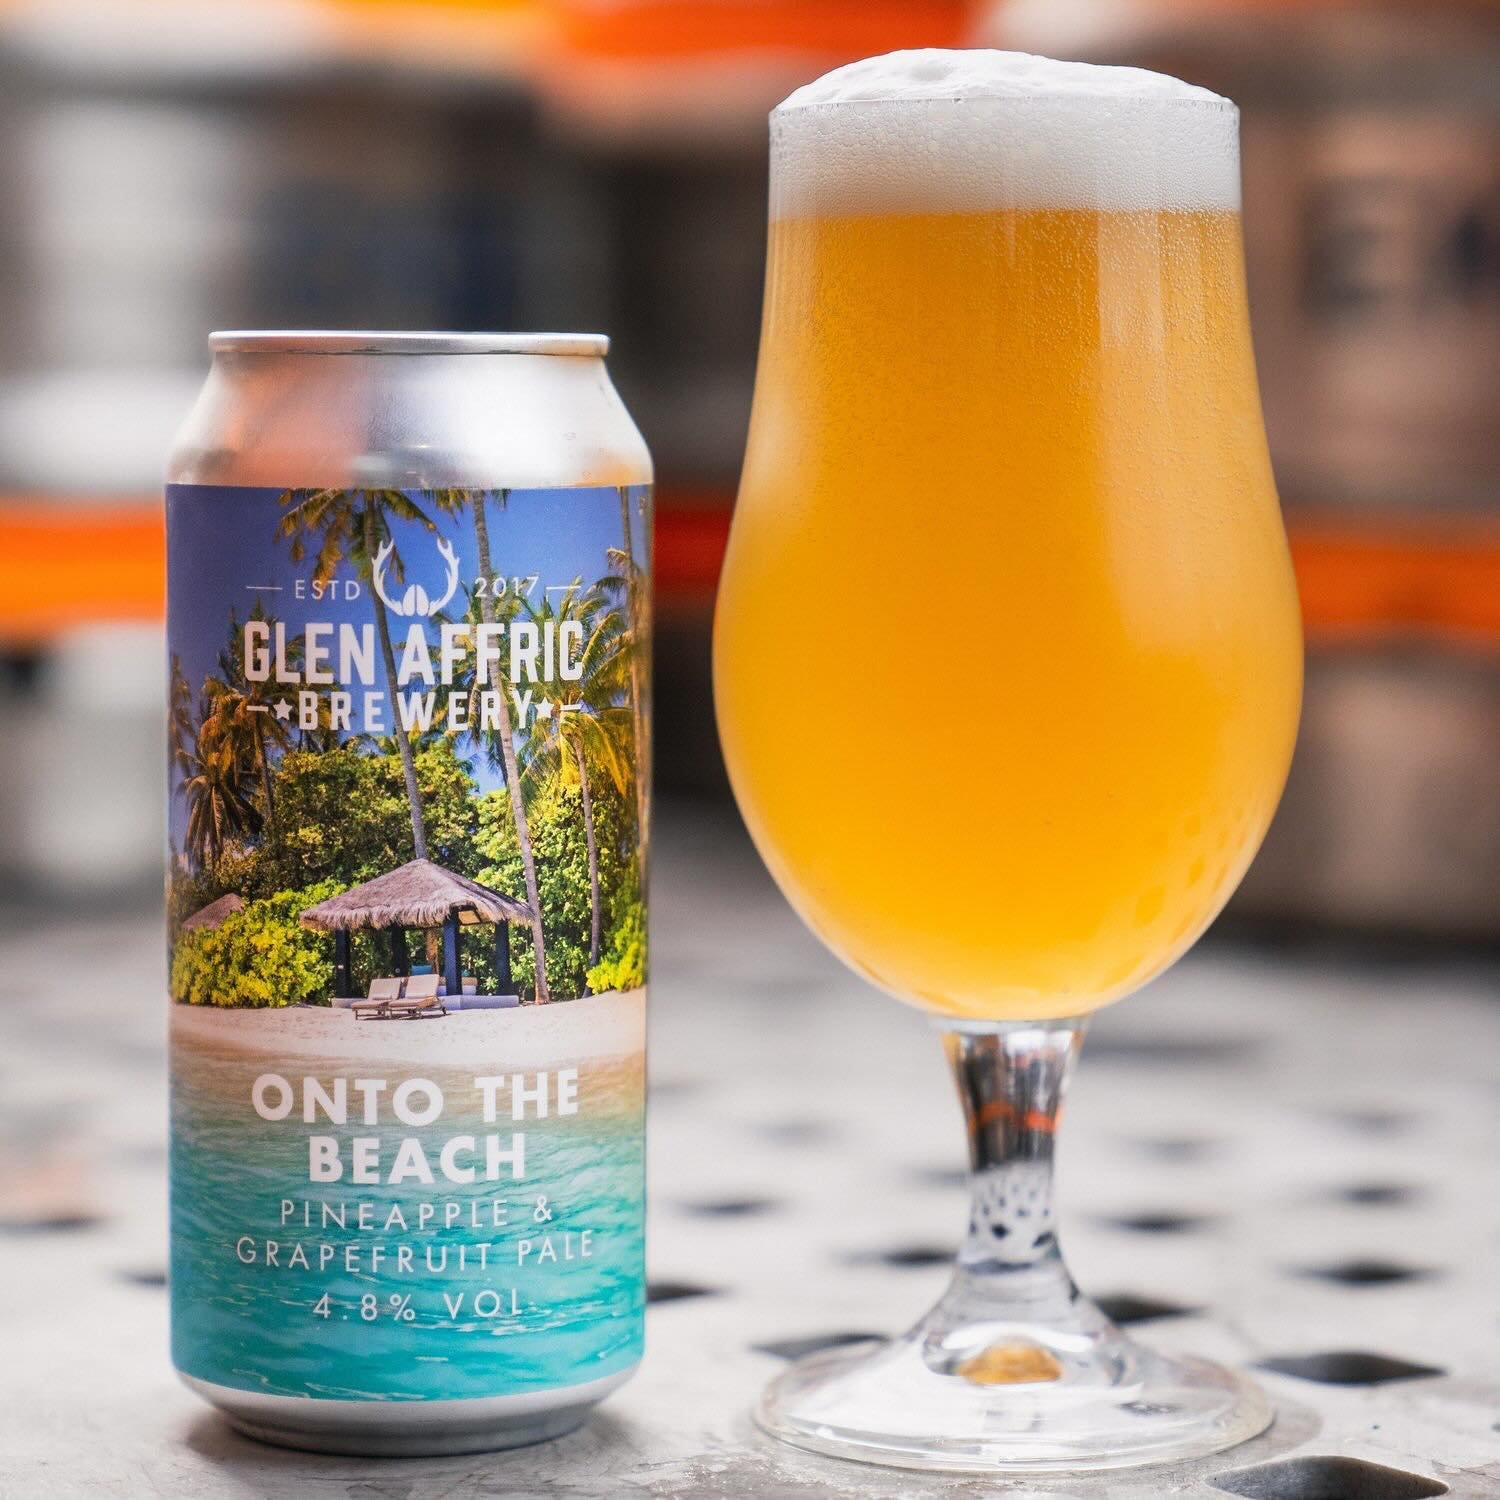 TIME TO GET &lsquo;ONTO THE BEACH&rsquo;
4.8% Pineapple &amp; Grapefruit Pale 🍍

Being packed AS WE SPEAK!

Ignore the recent terrible weather and escape the pace of daily life, make your way onto the beach for a tropical getaway with this fresh bat